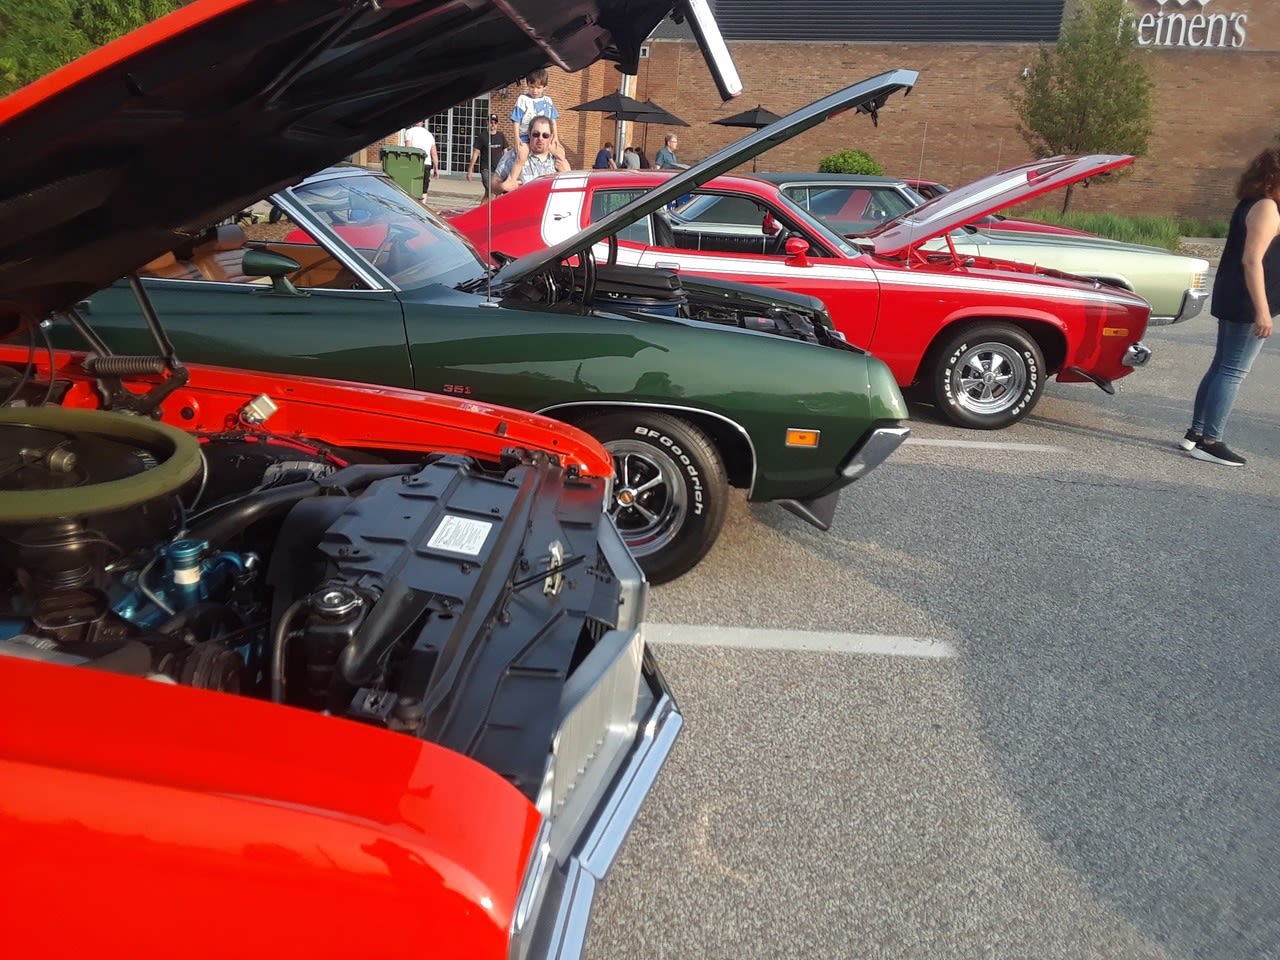 Mayfield Village announces full summer of recreational activities, including Cruise Night June 8